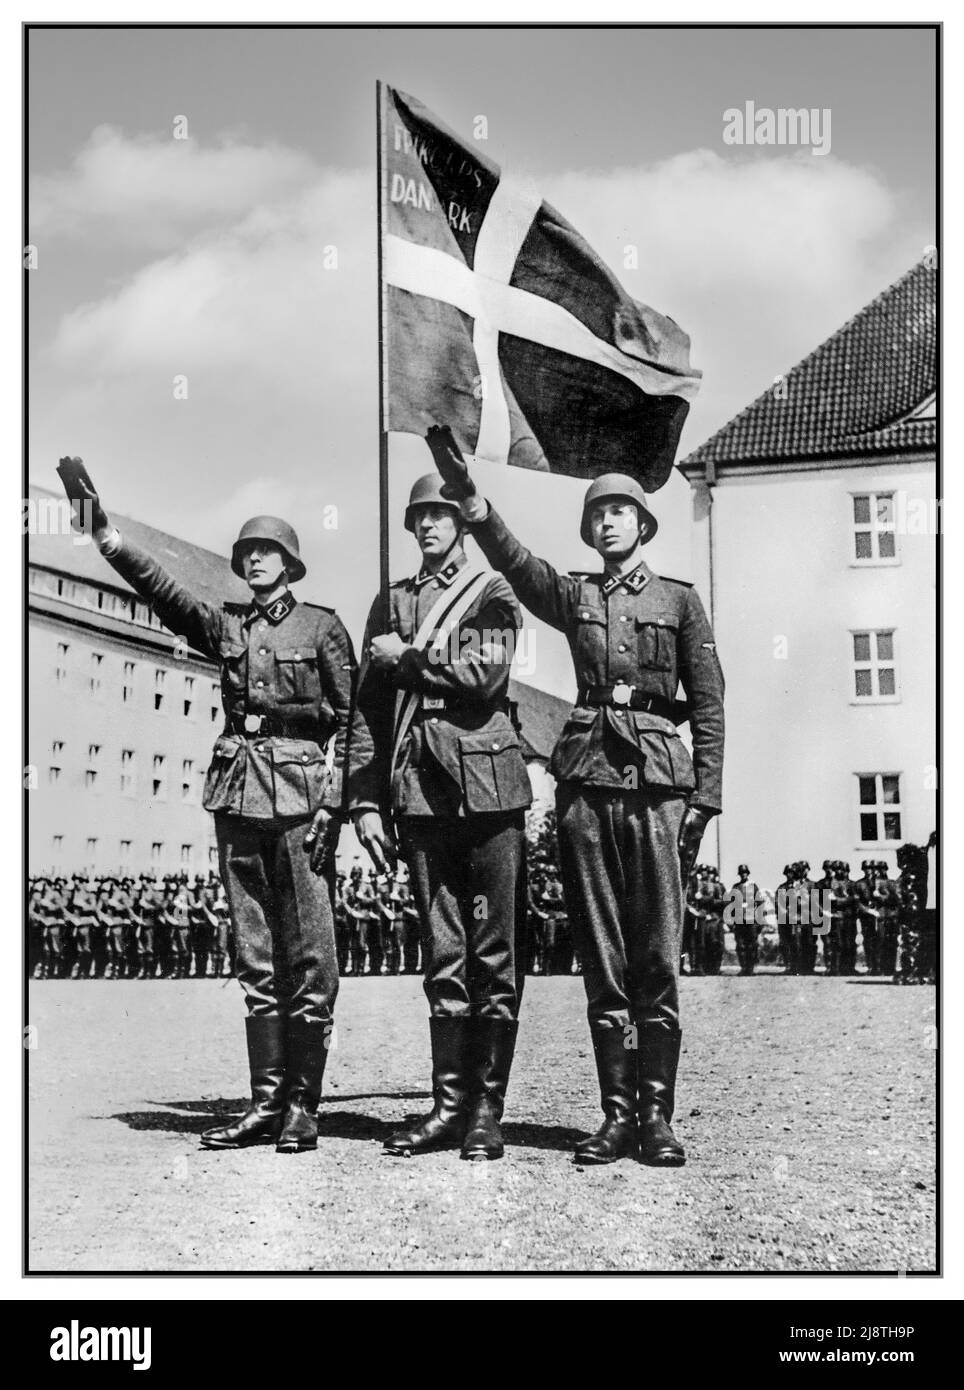 1940s DENMARK WW2 Nazi SS Frikorps Danmark soldiers during the swearing-in in the SS barracks Hamburg-Langenhorn Denmark  Date July 1941 WW2 World War II Second World War  Free Corps Denmark was a Danish volunteer free corps created by the Danish Nazi Party in cooperation with Nazi Germany, to fight the Soviet Union during the Second World War. On 29 June 1941, days after the German invasion of the Soviet Union, the DNSAP's newspaper Fædrelandet proclaimed the creation of the corps. Stock Photo